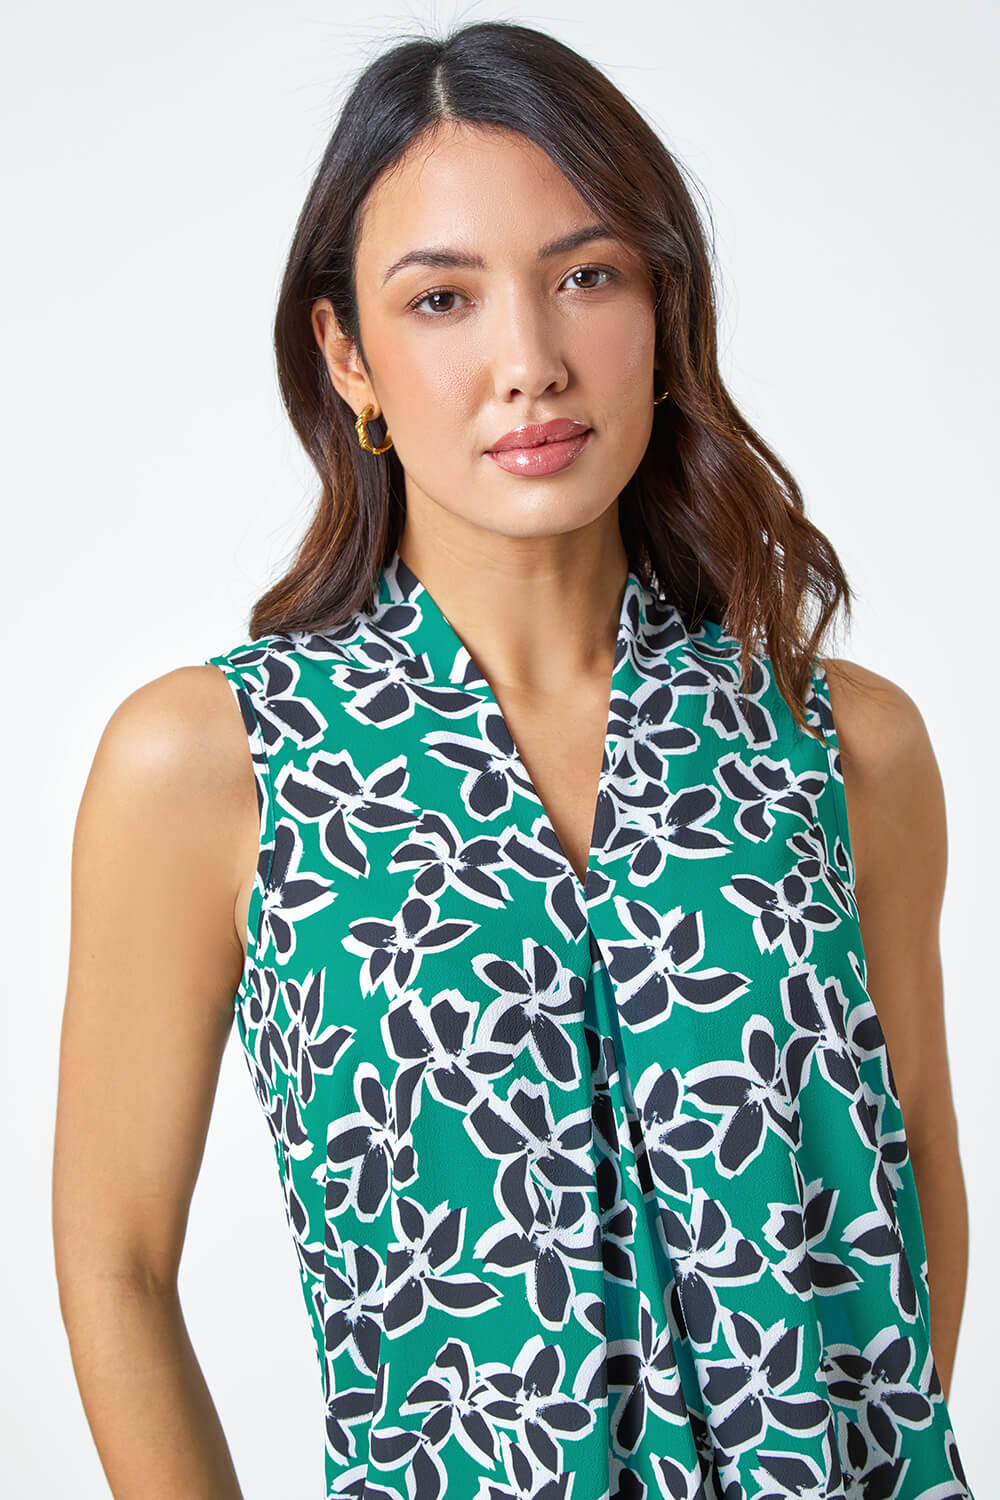 Green Sleeveless Floral Print Stretch Top, Image 4 of 5